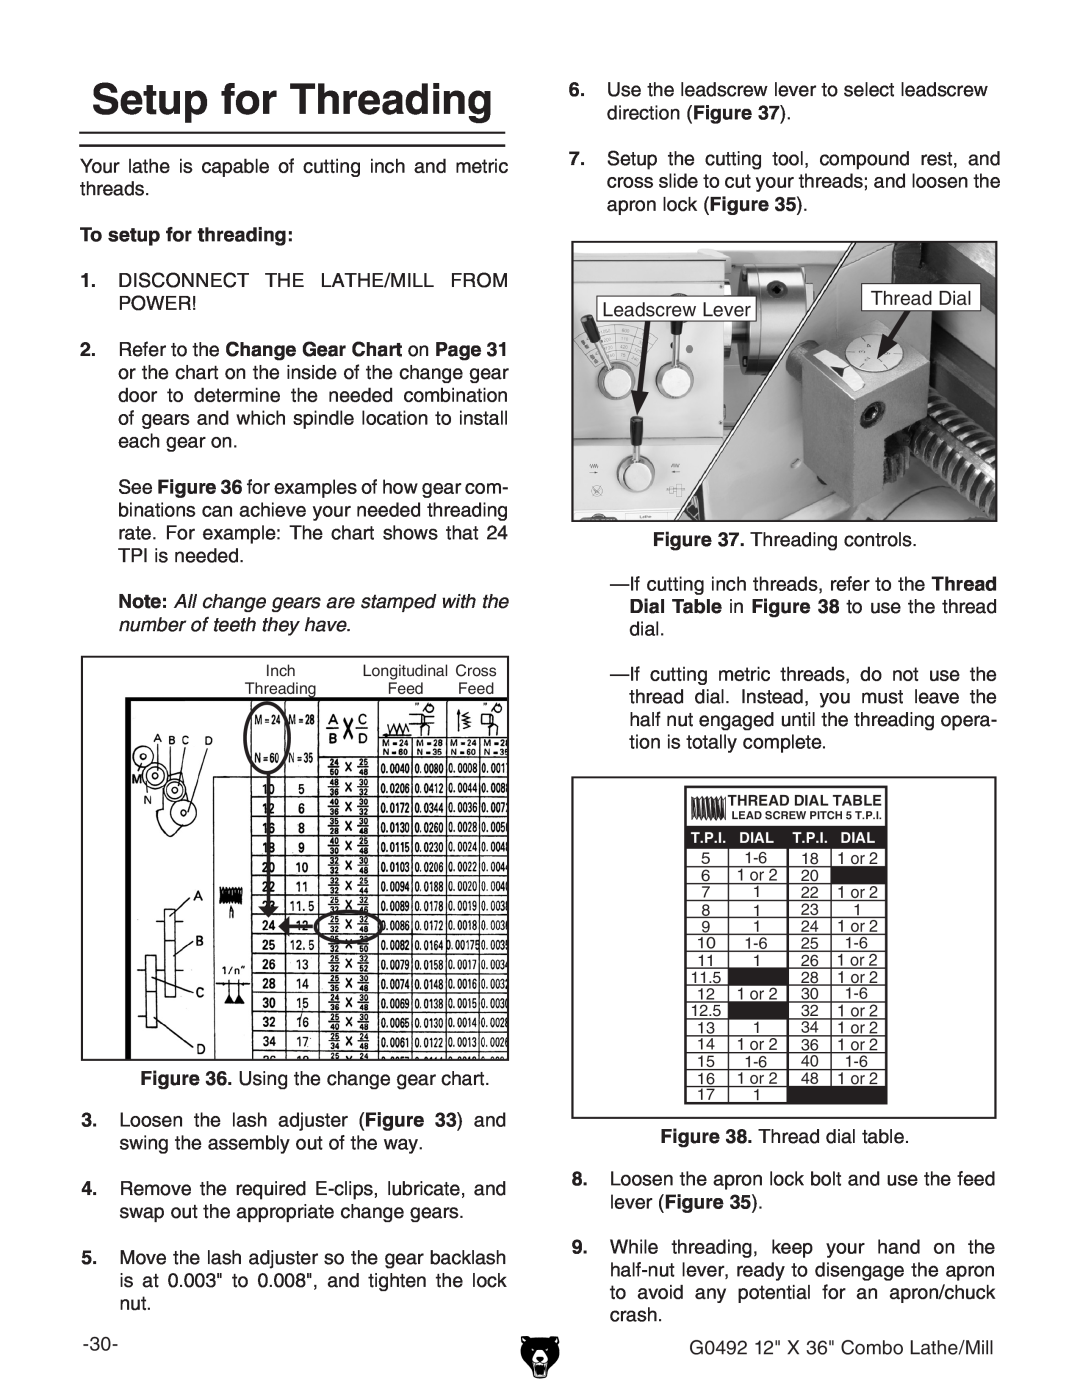 Grizzly G0492 owner manual Setup for Threading, To setup for threading 